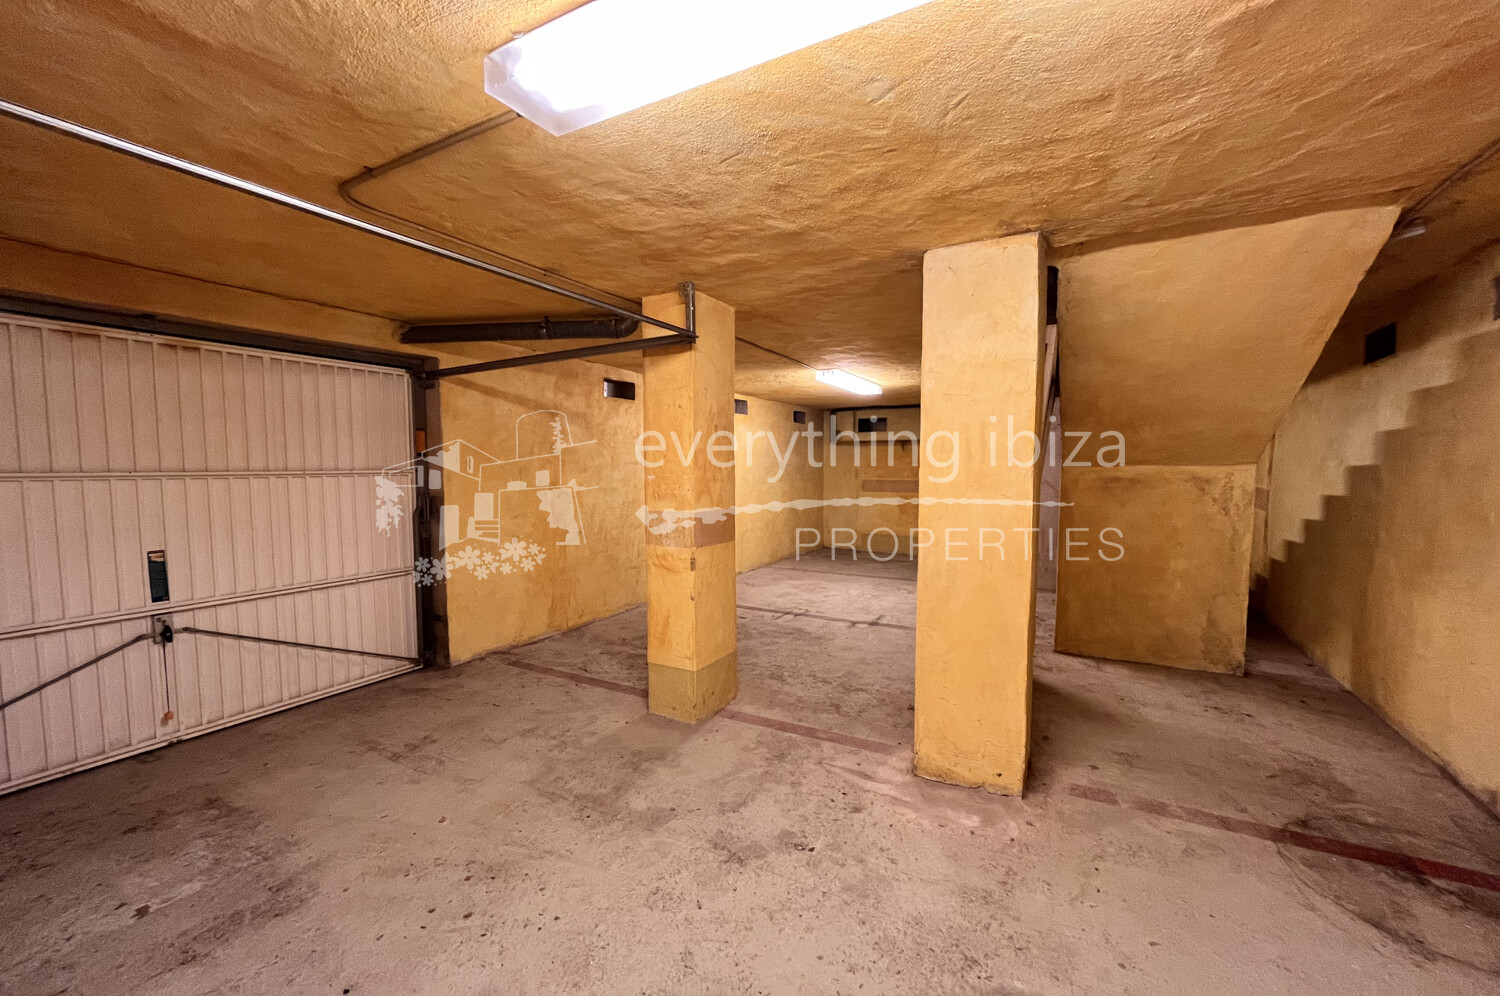 Versatile Commercial Property in the Centre of San Jose, ref. 1640, for sale in Ibiza by everything ibiza Properties